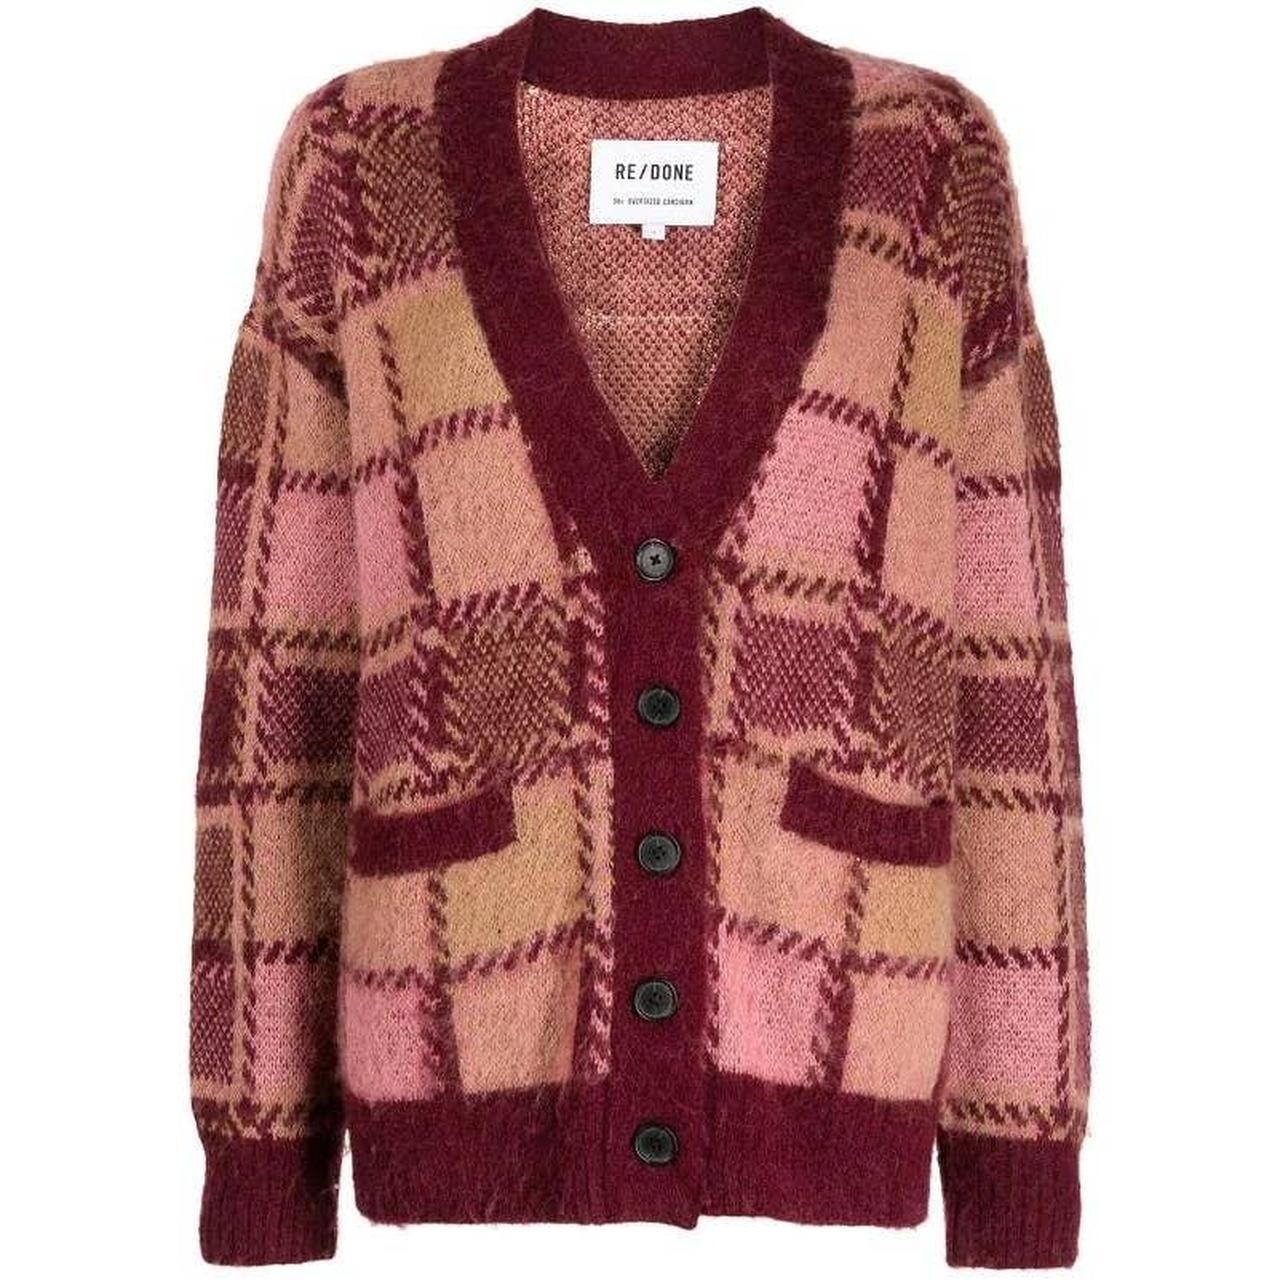 RE/DONE Women's Pink and Brown Jumper